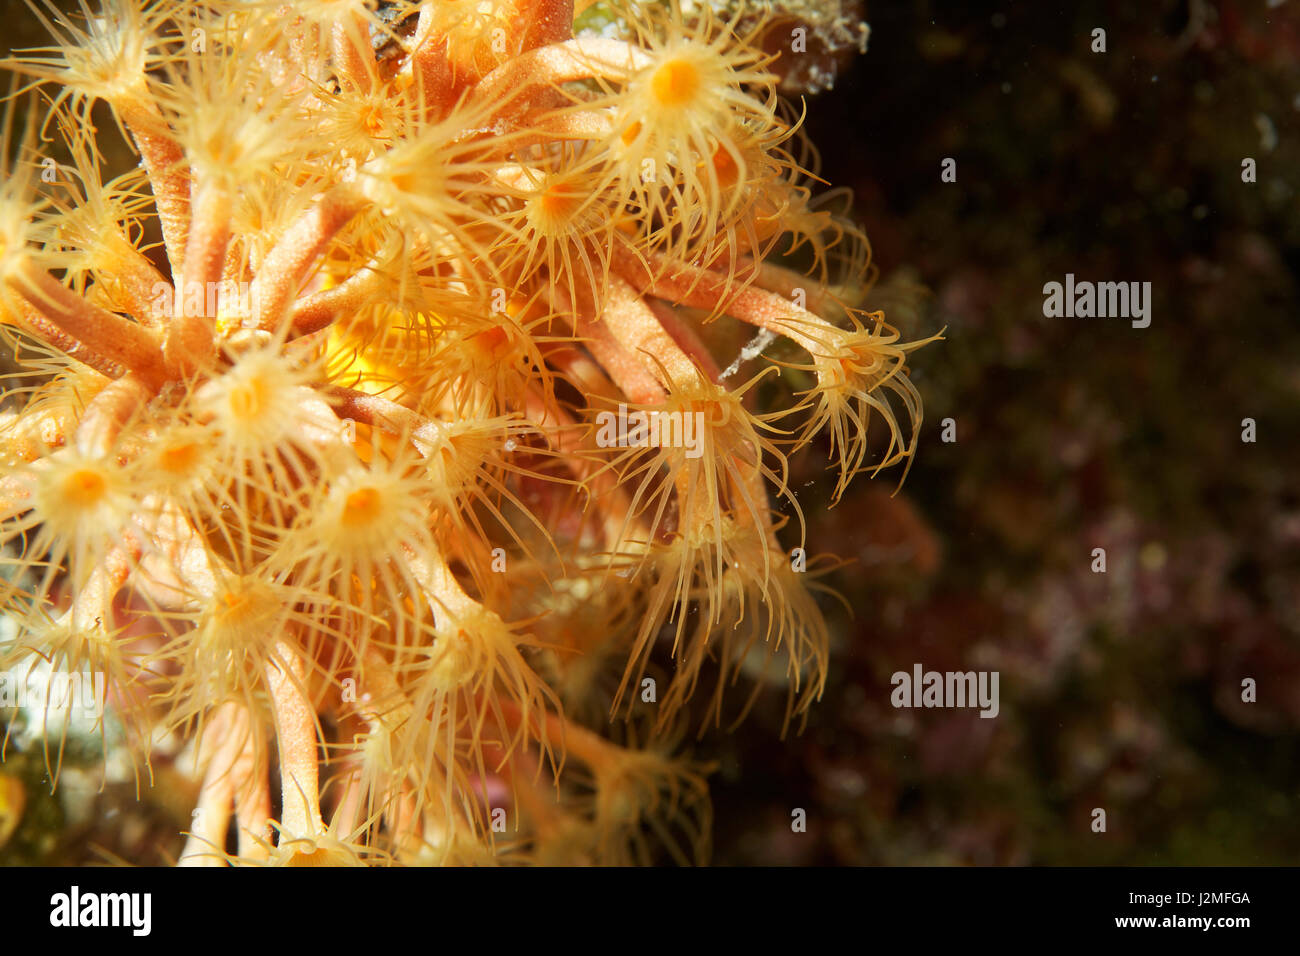 The coral yellow cluster anemone in the Adriatic Sea, near Pag island Stock Photo